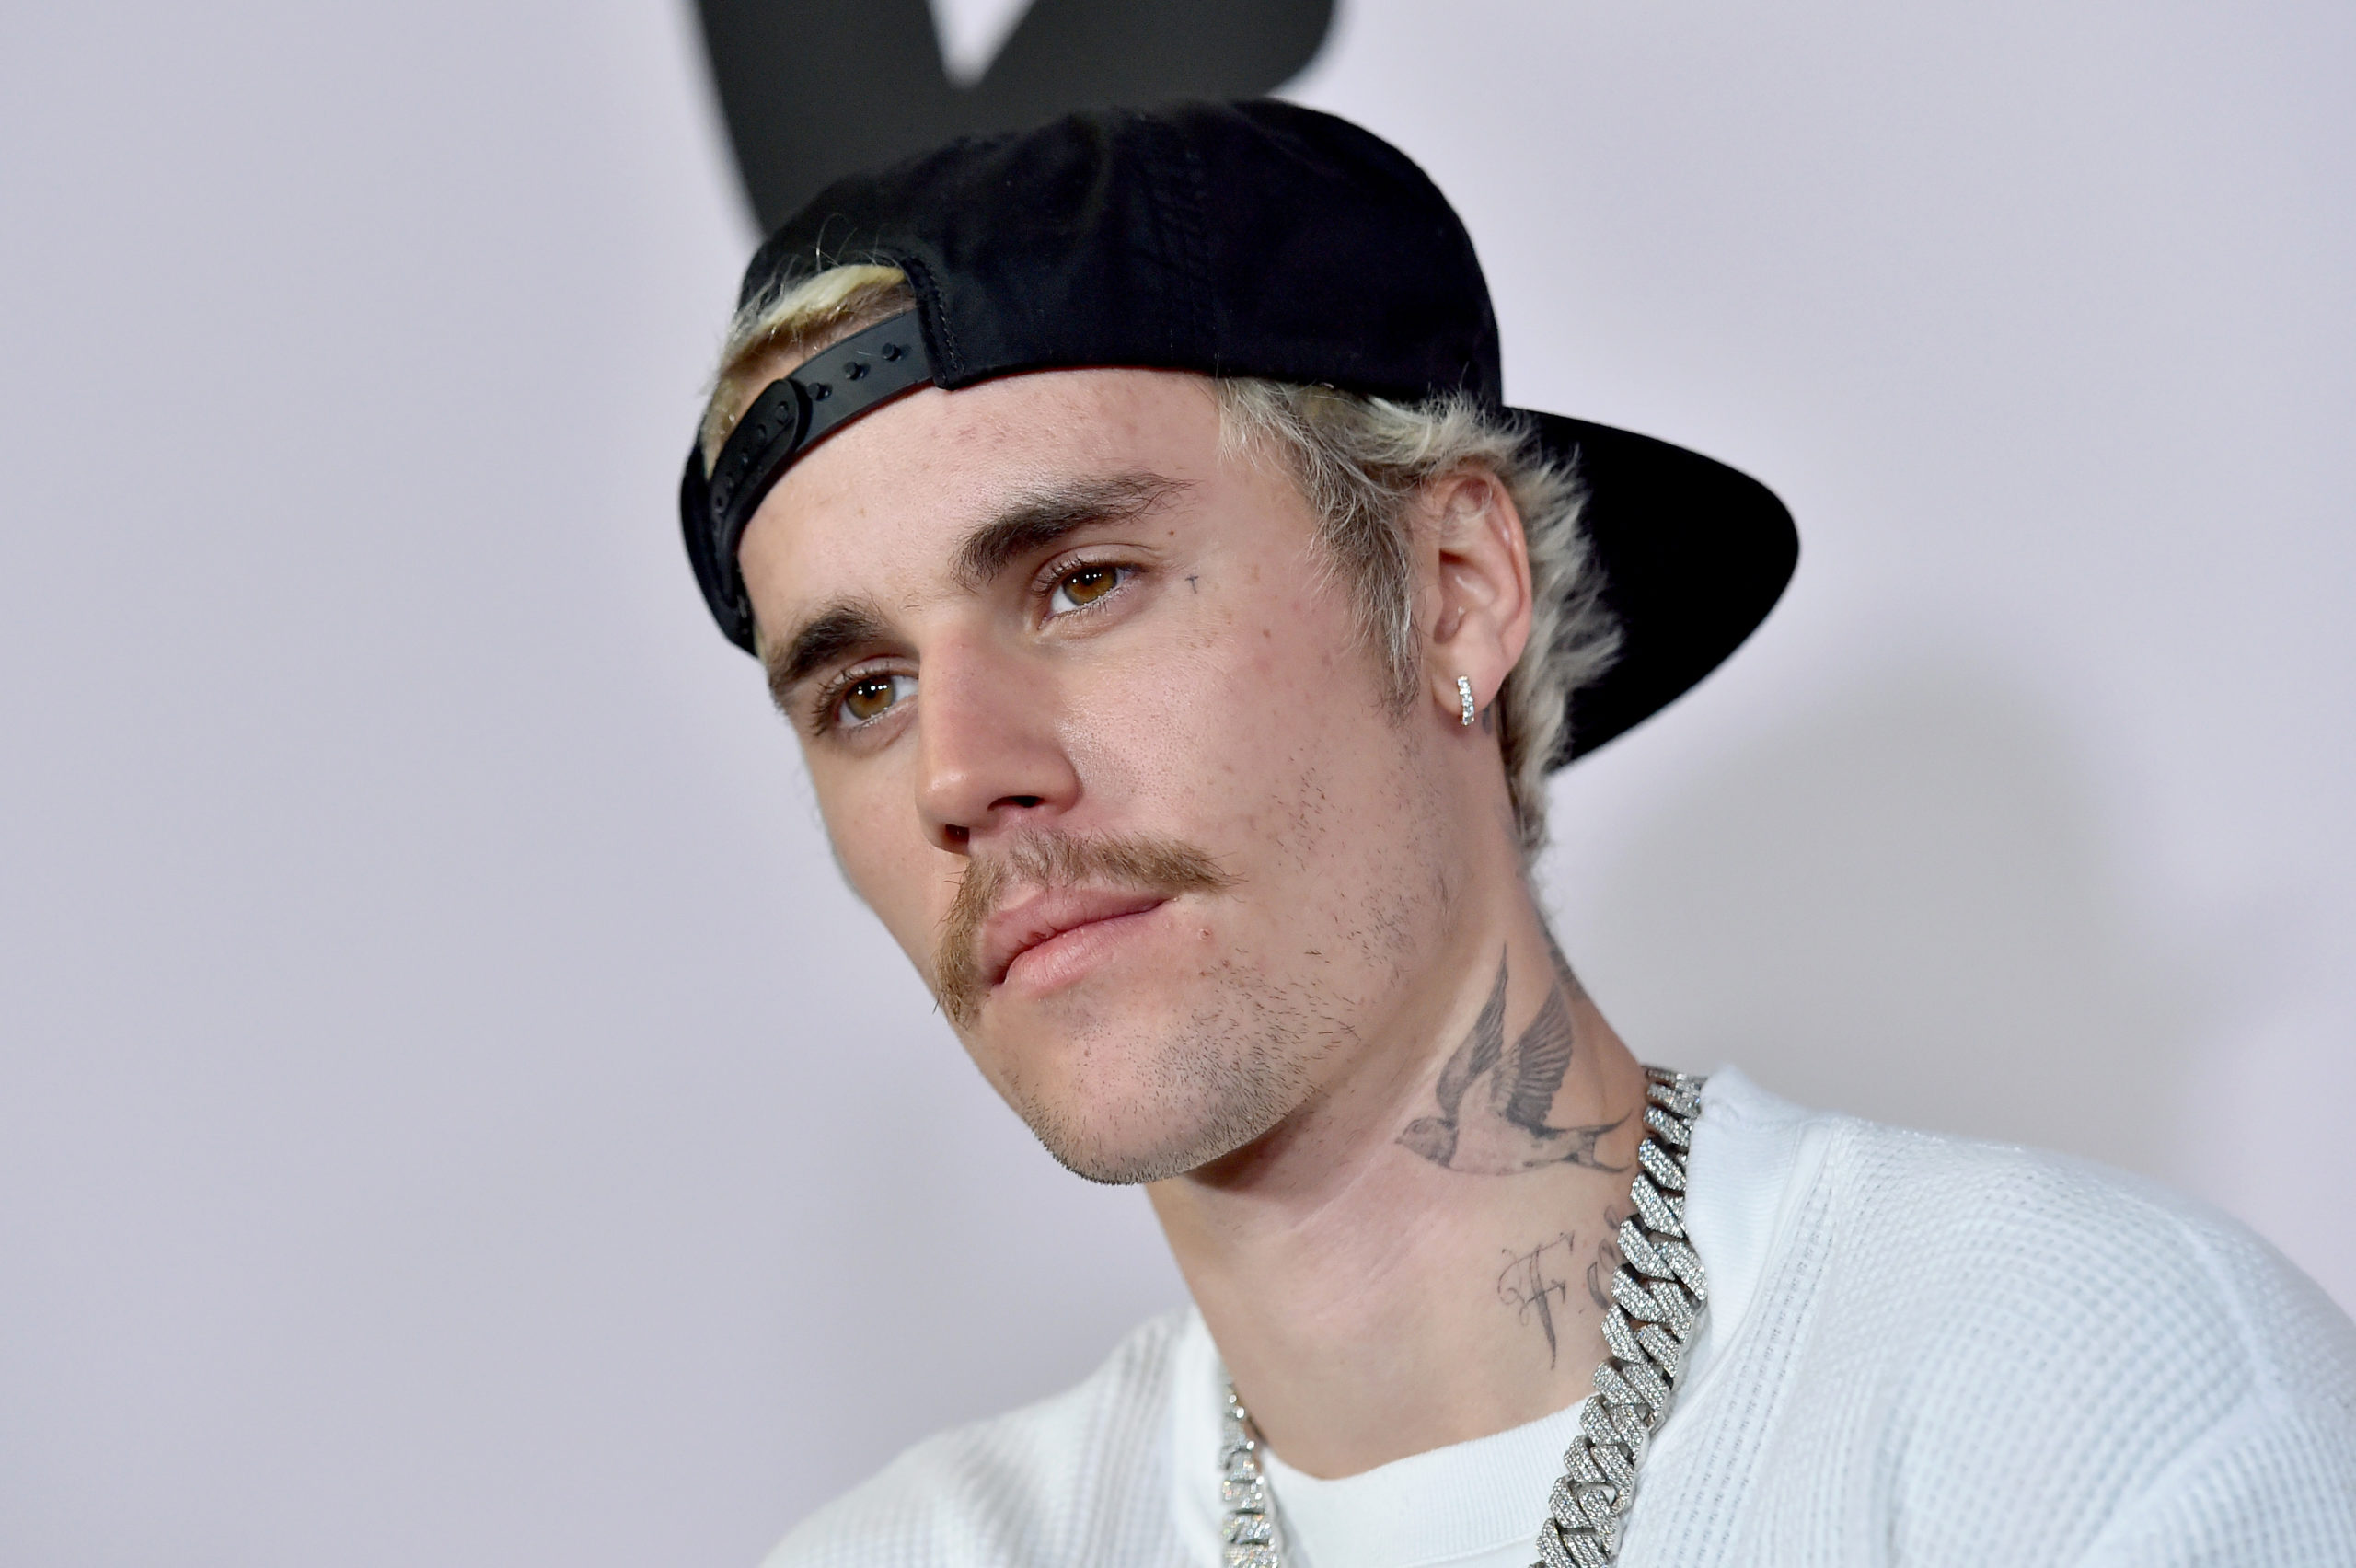 Justin Bieber Can Subpoena Twitter To Identify Sexual Assault Accusers In $20M Defamation Lawsuit